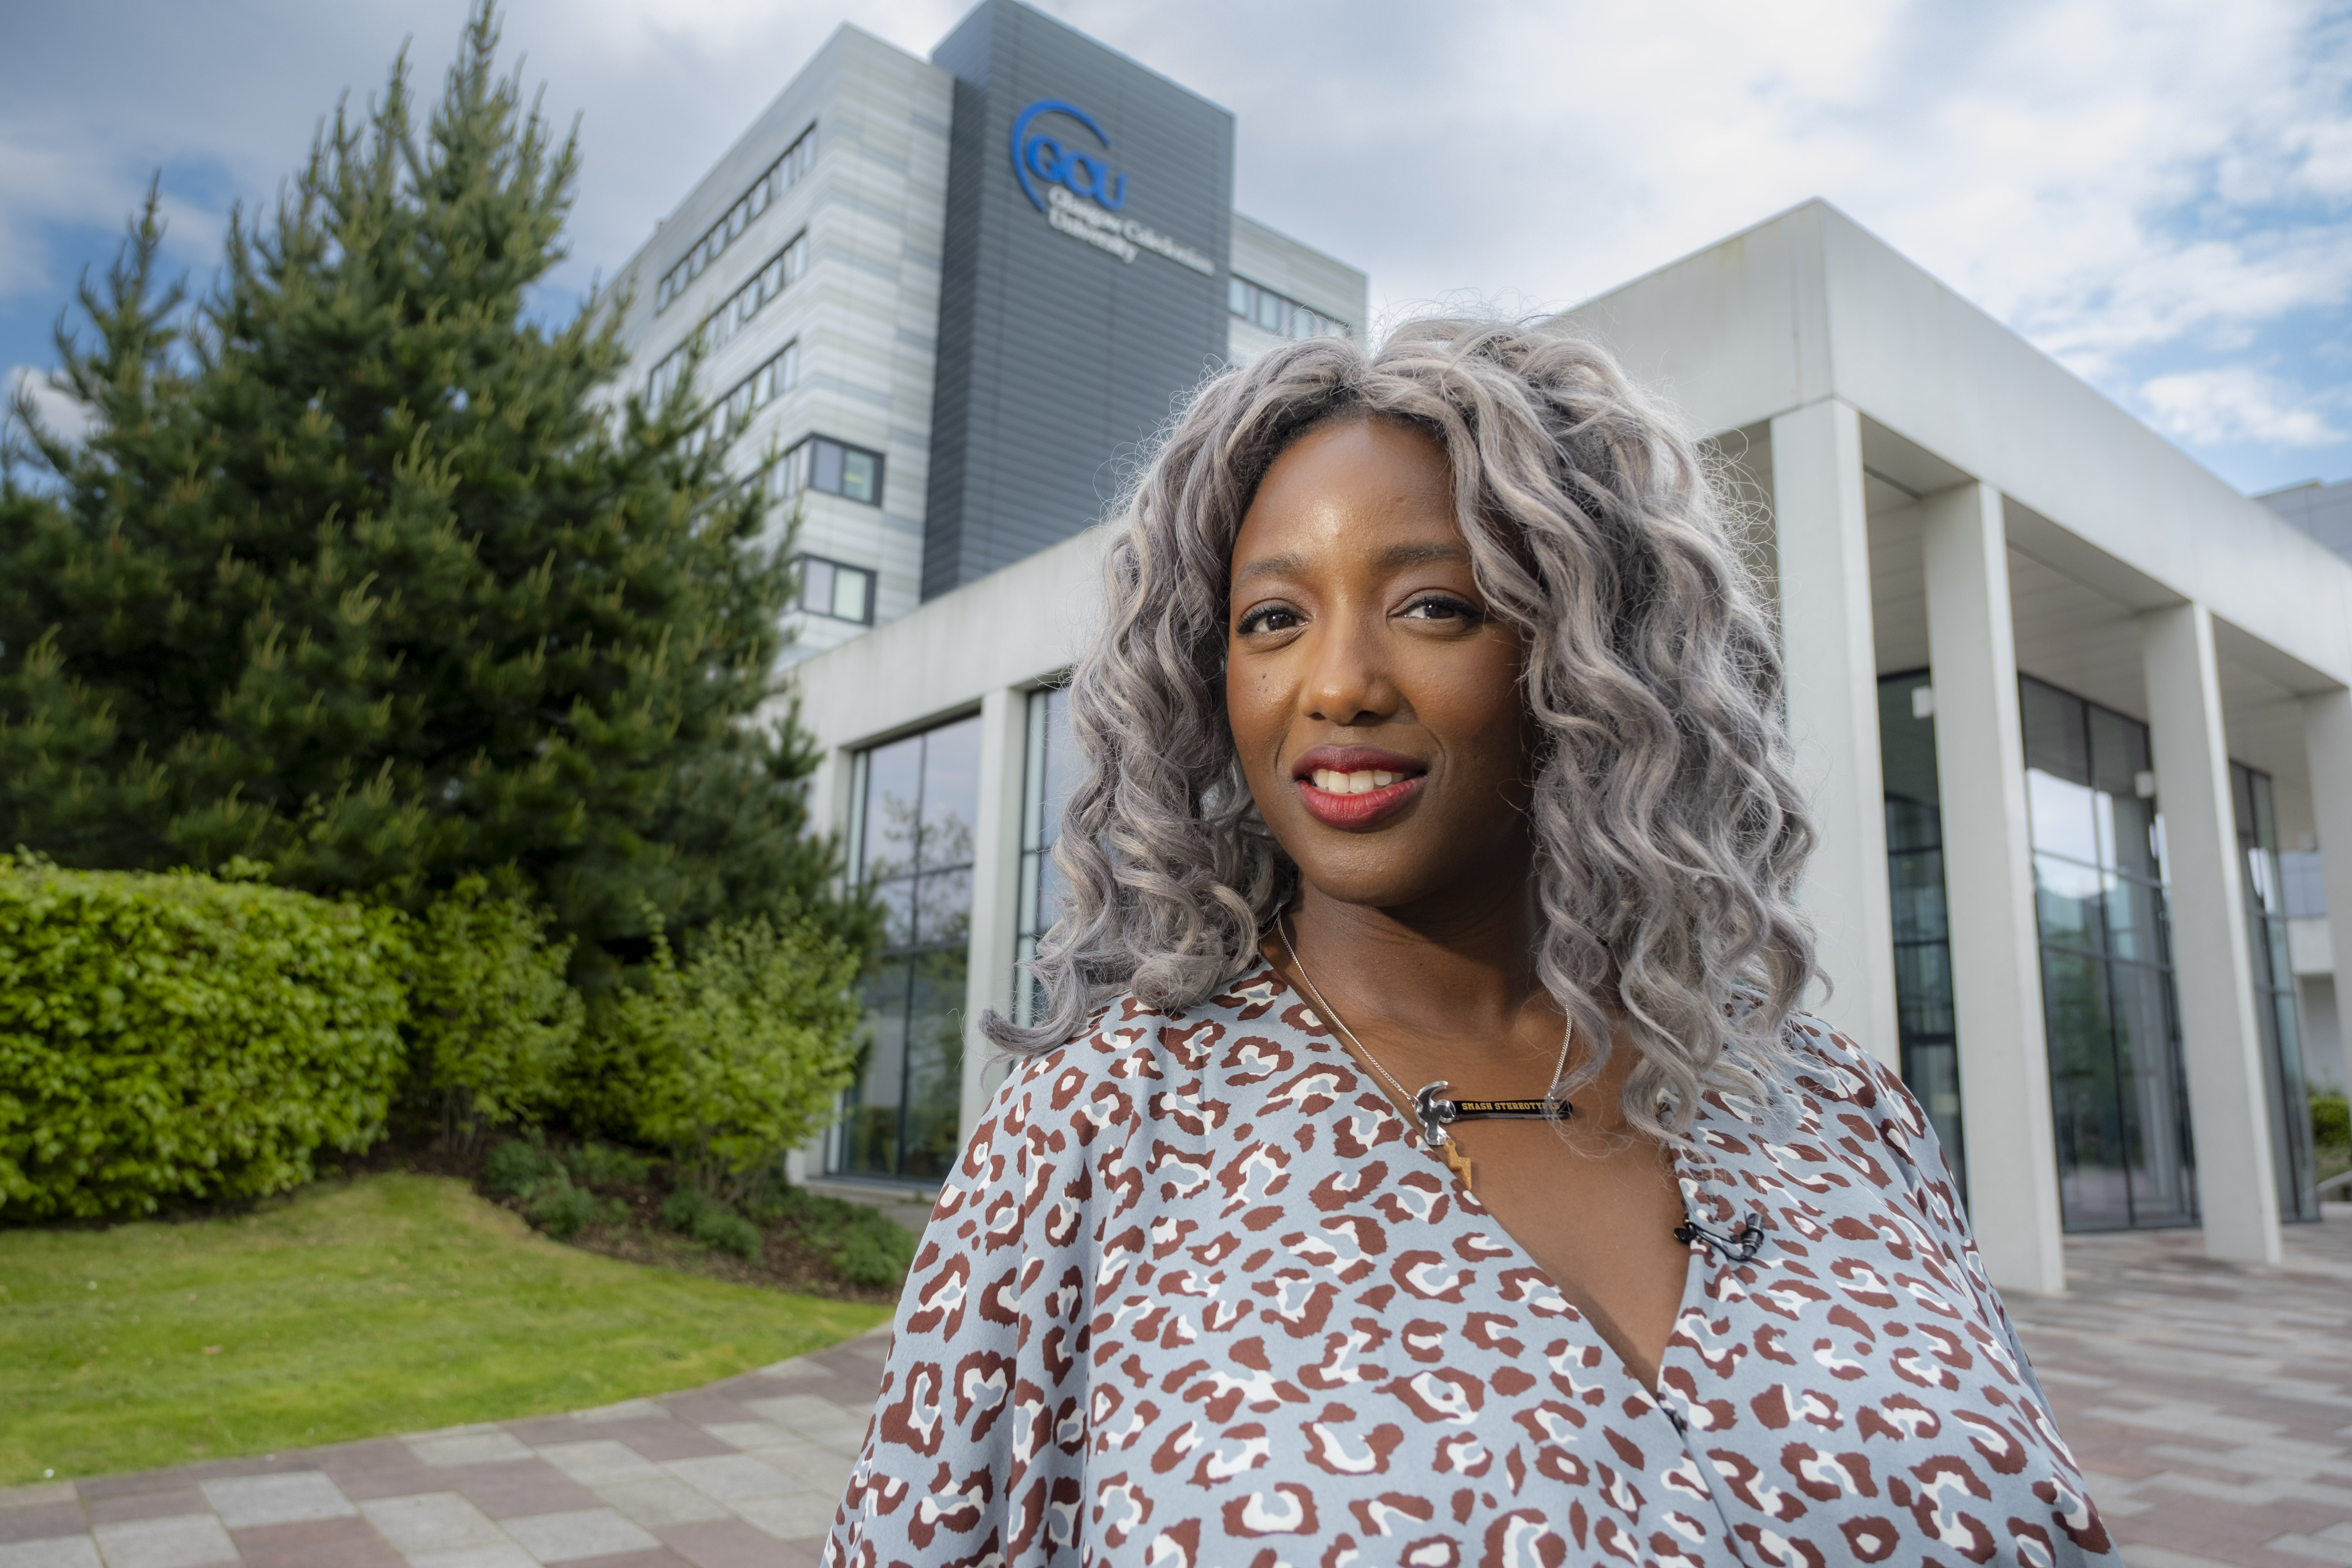 Anne-Marie Imafidon pictured outside the university building